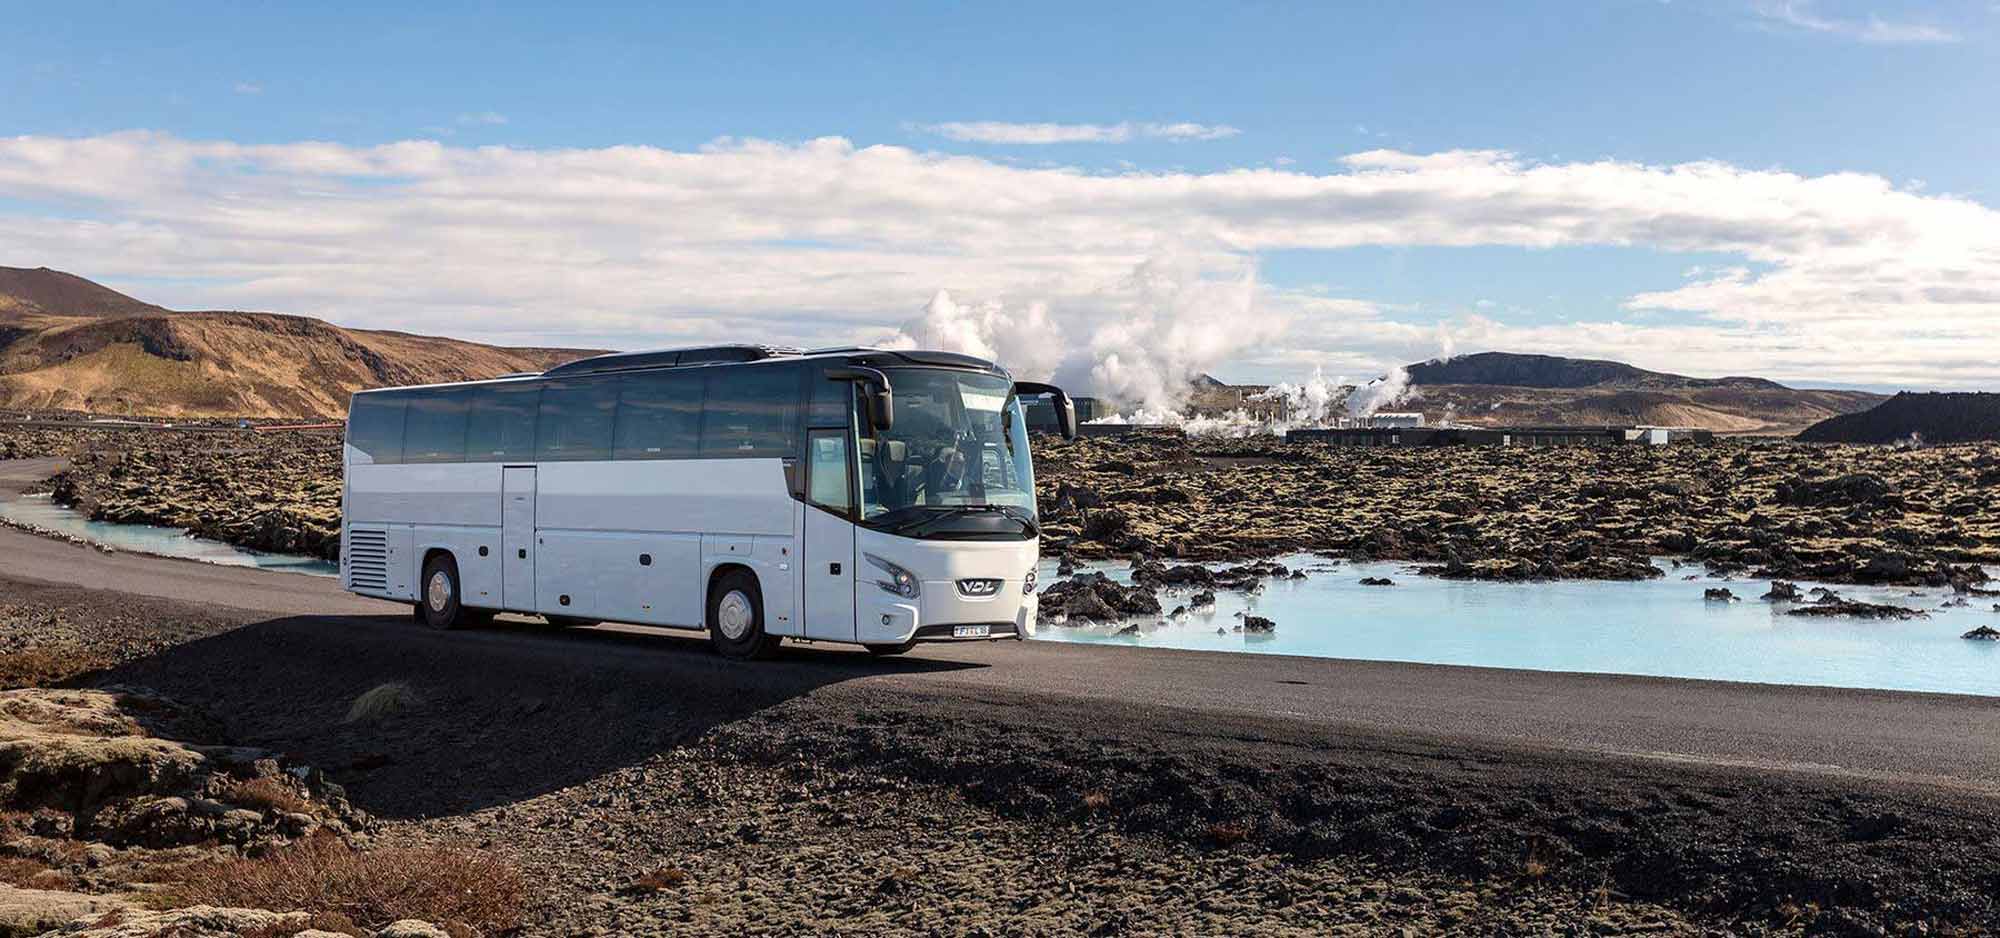 Blue Lagoon  Your Day Tours